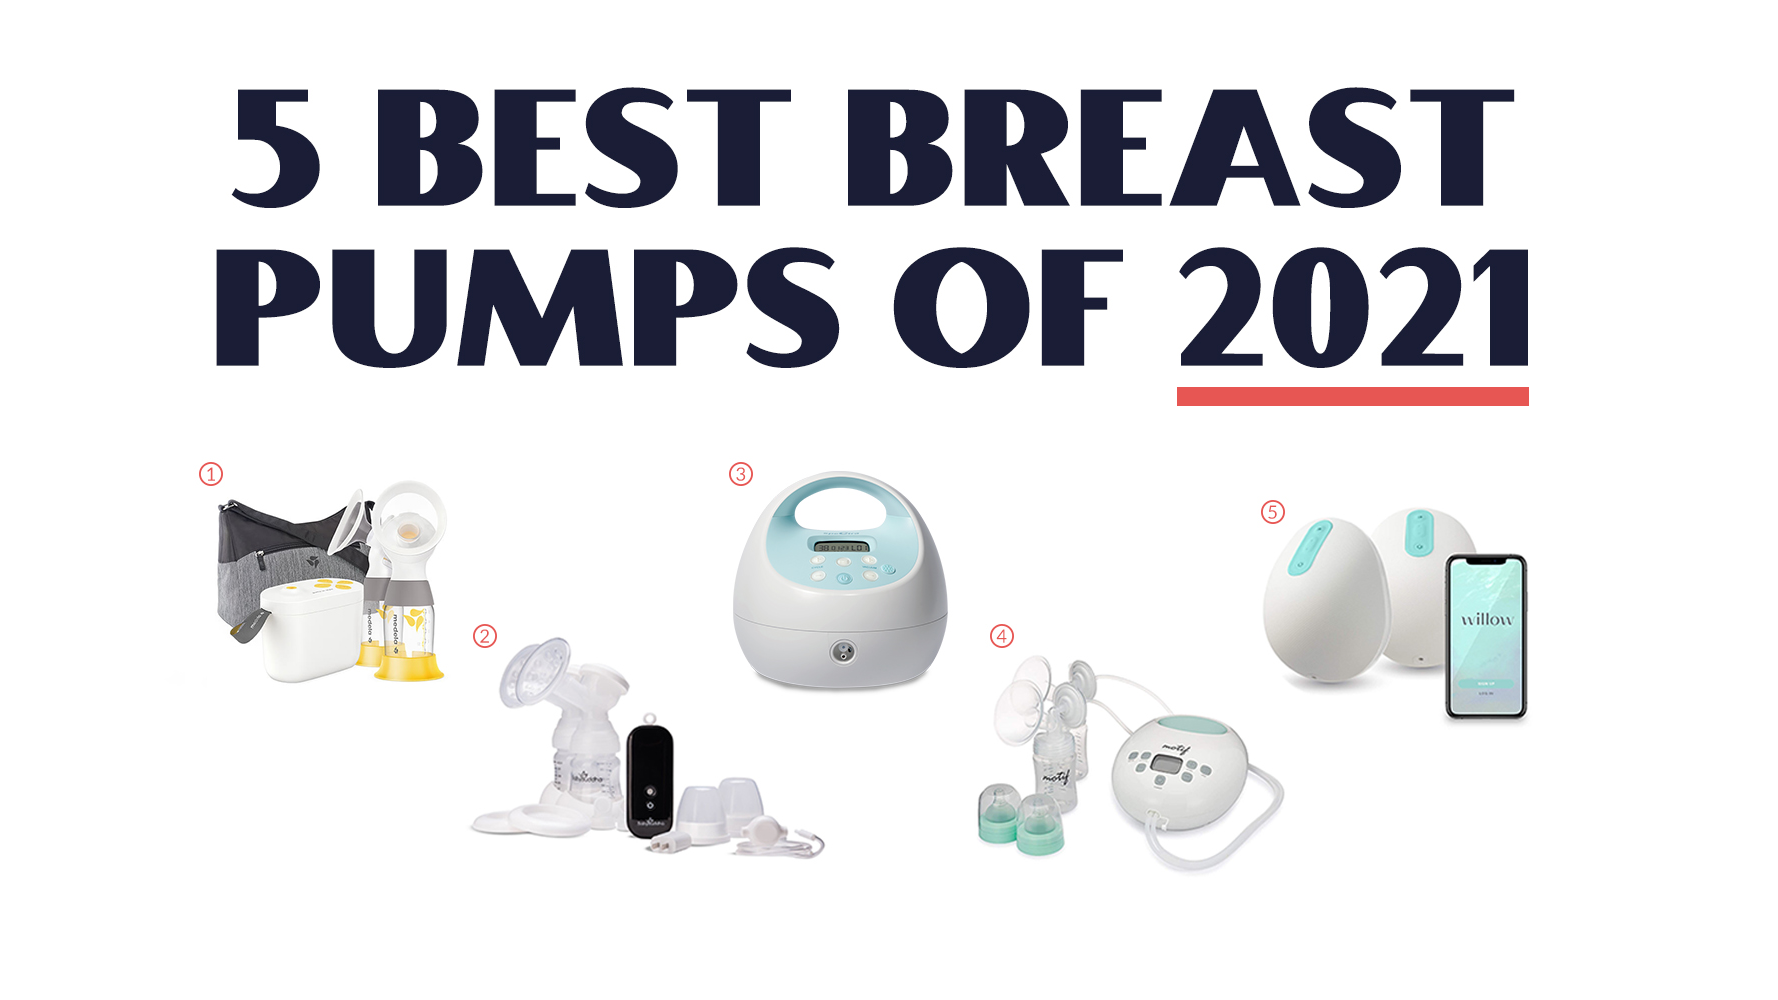 5 Best Breast Pumps of 2021 image